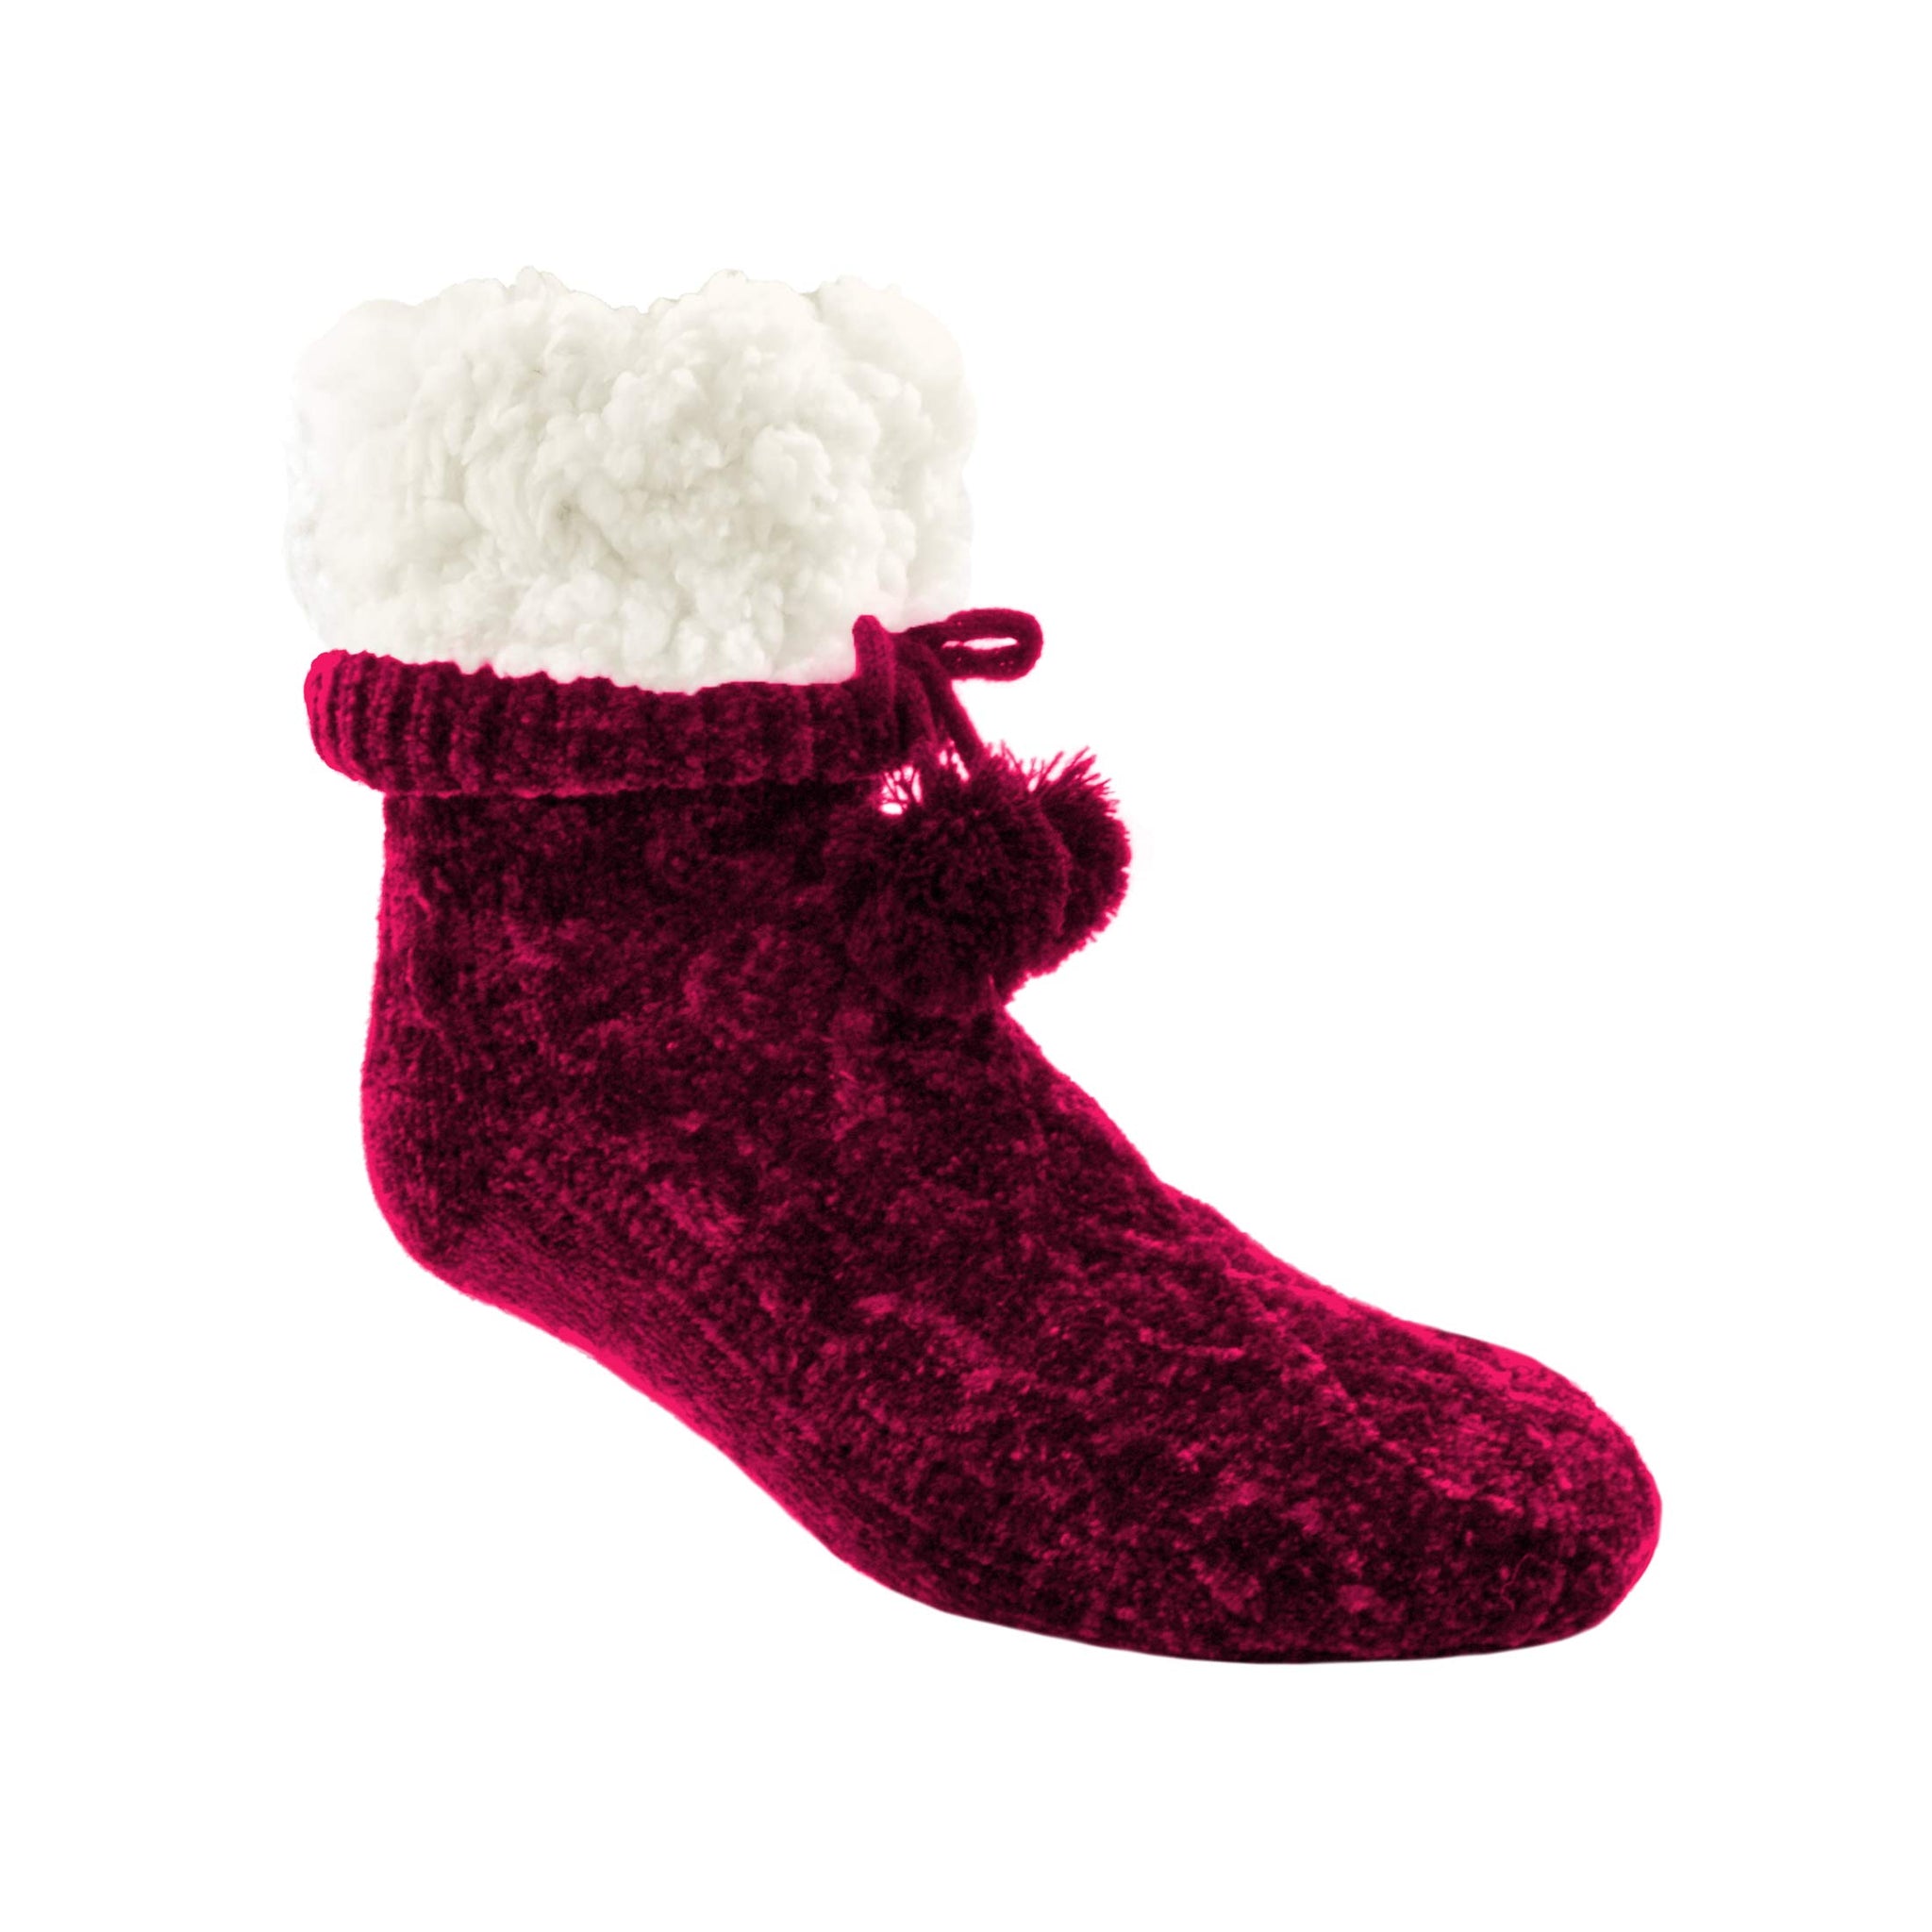 Pudus Adult Chenille Knit Winter Slipper Socks with Grippers & Fleece Lining